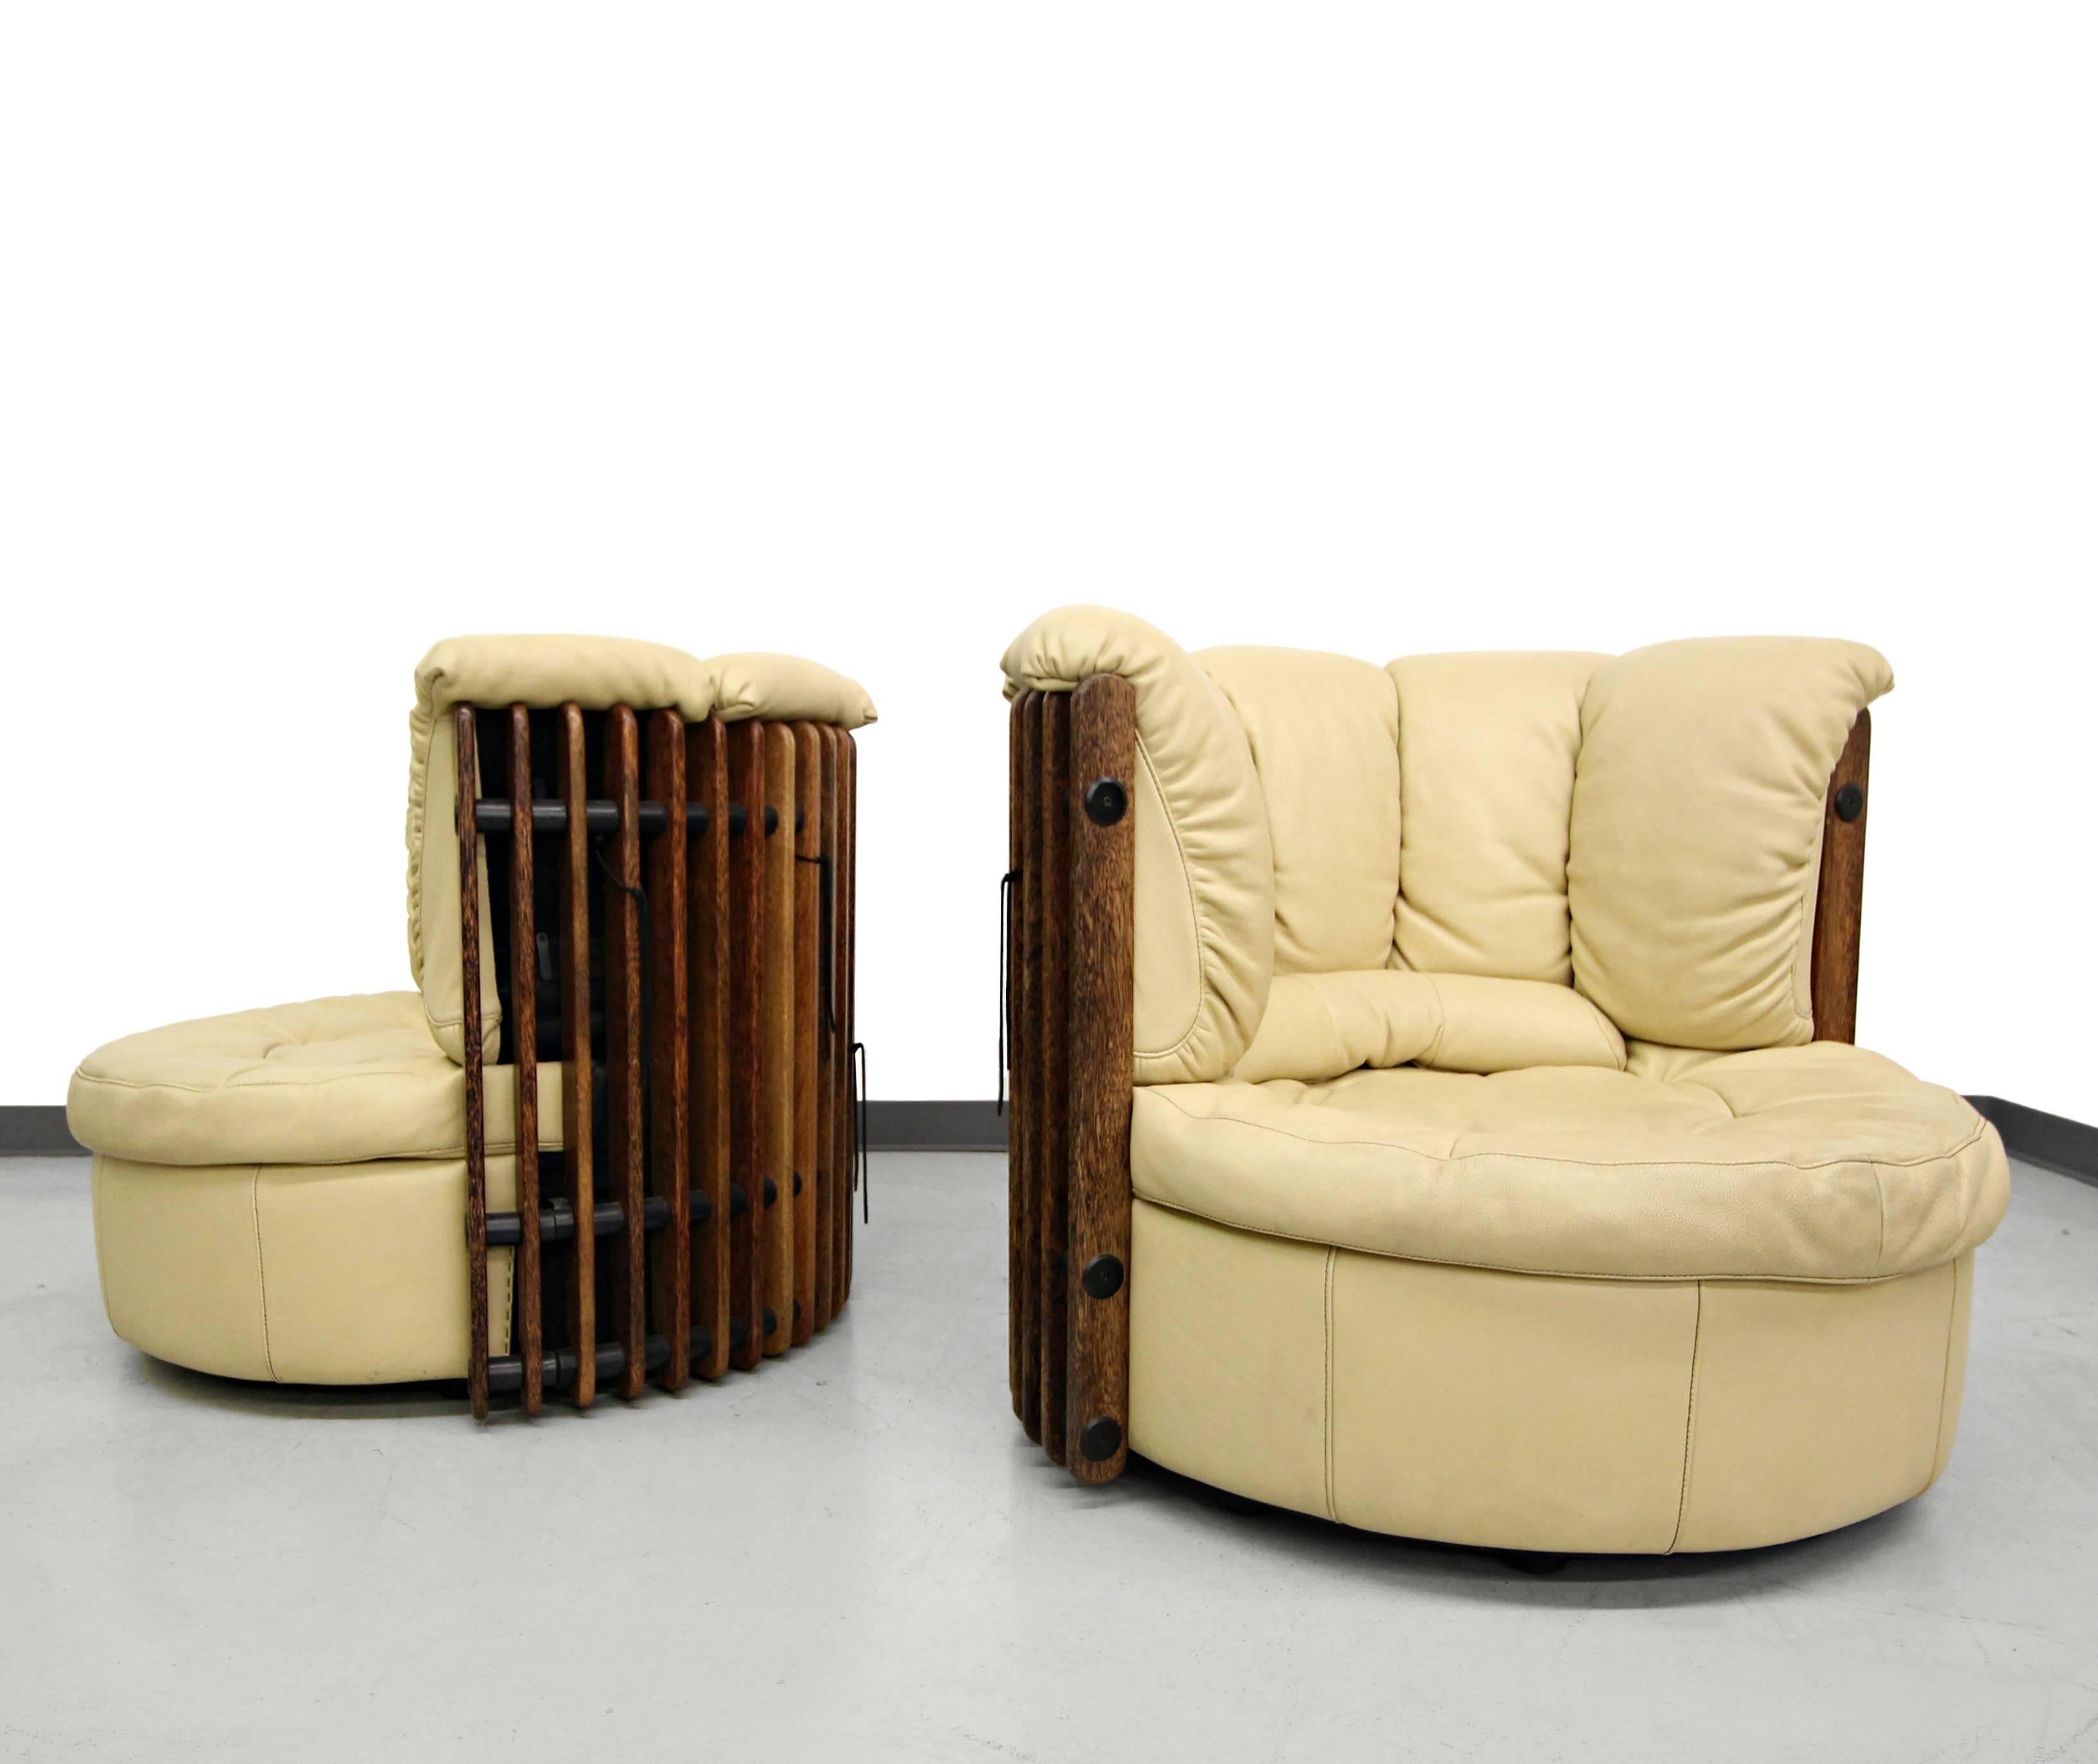 Pacific Green's Isle D'Palm palm wood and leather swivel chairs. Constructed out of shell of Palmwood® slats and leather. Chairs swivel a full 360 degrees.

Pacific Green is a sustainable furniture company based in Australia that was started in